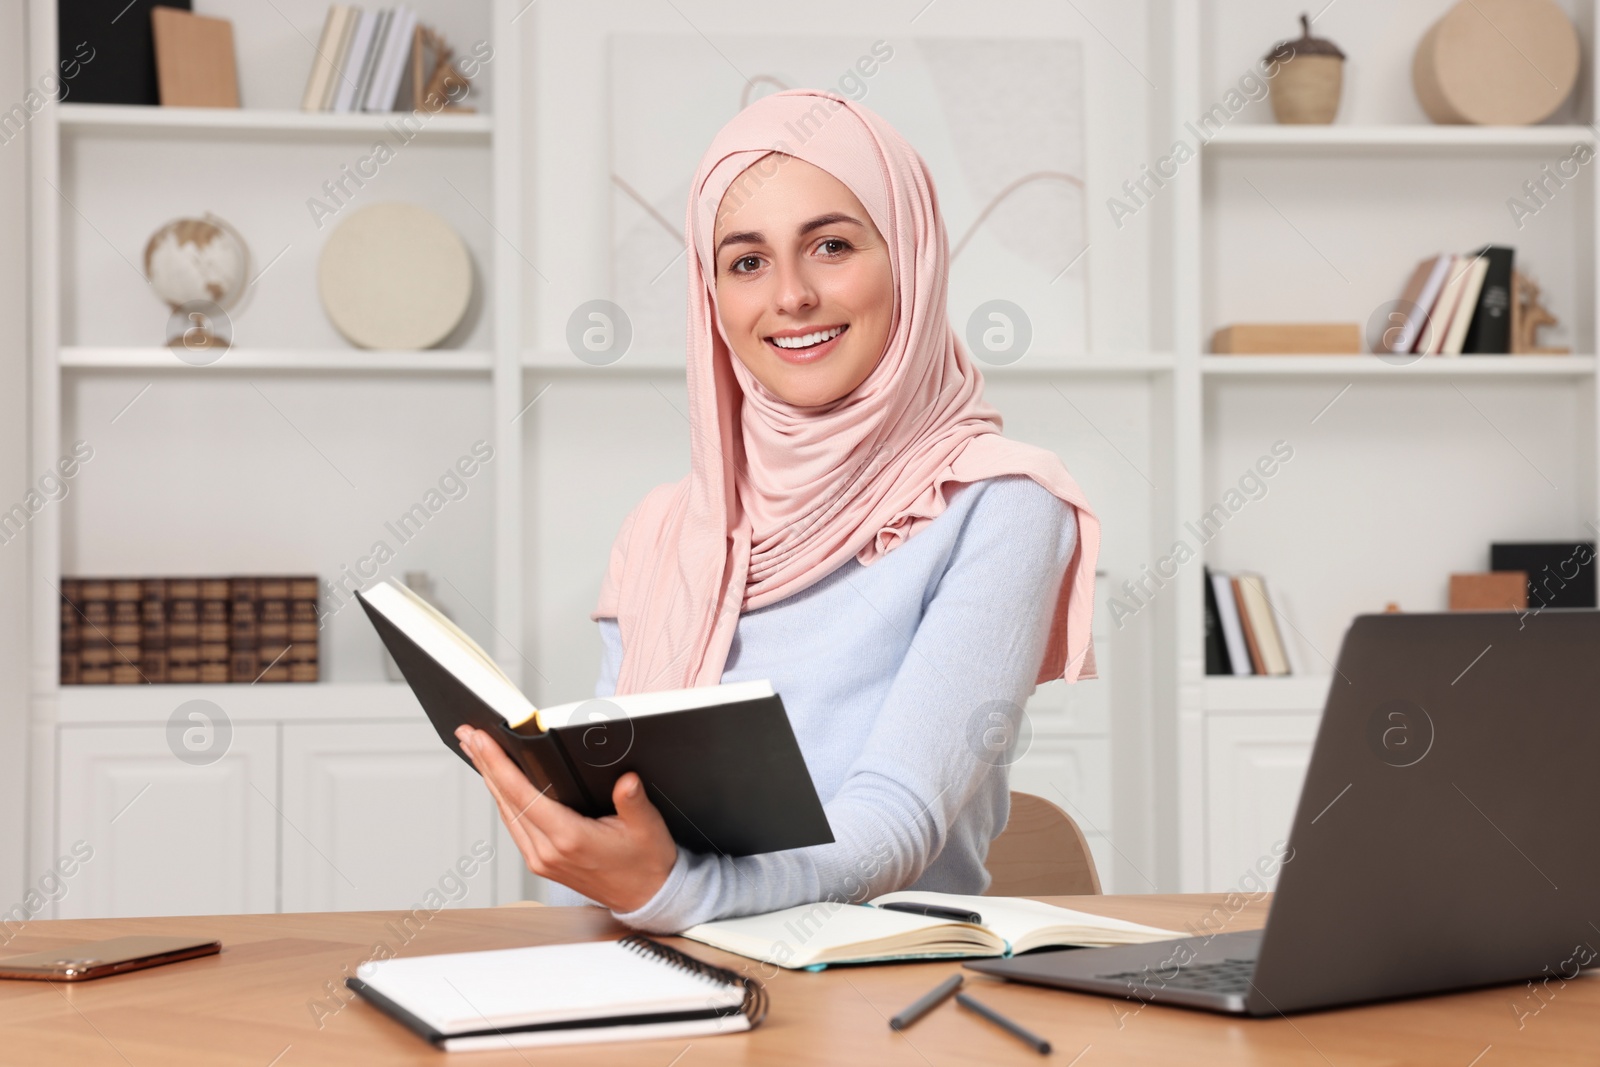 Photo of Muslim woman studying near laptop at wooden table in room